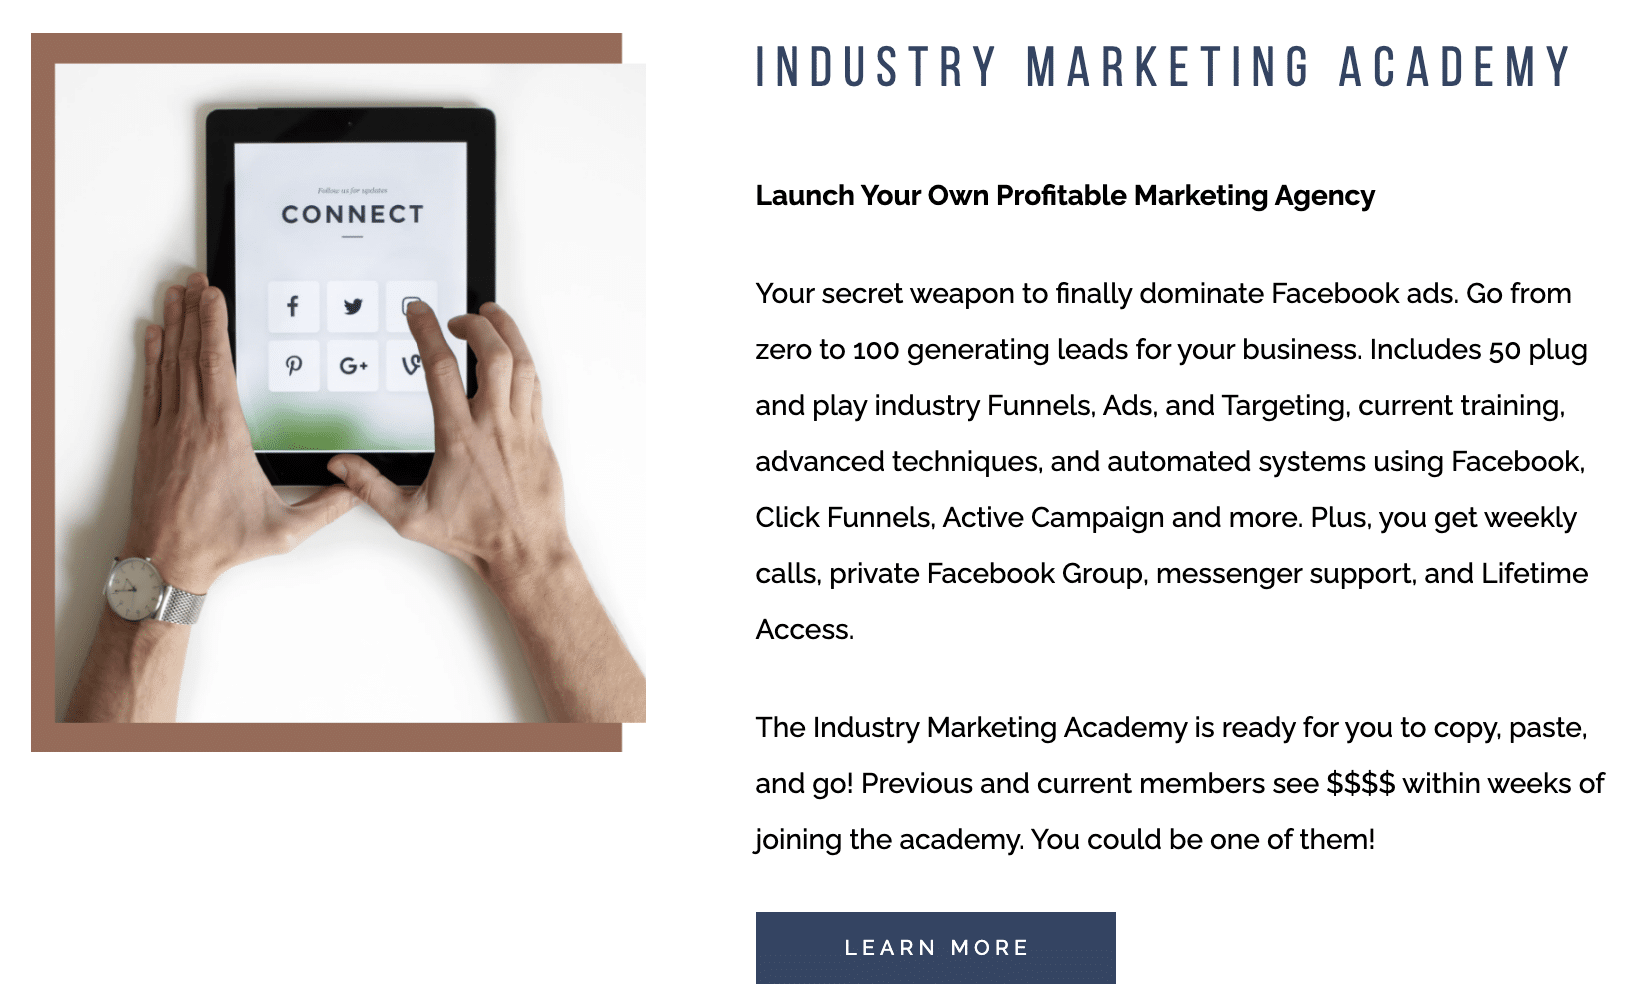 The Industry Marketing Academy